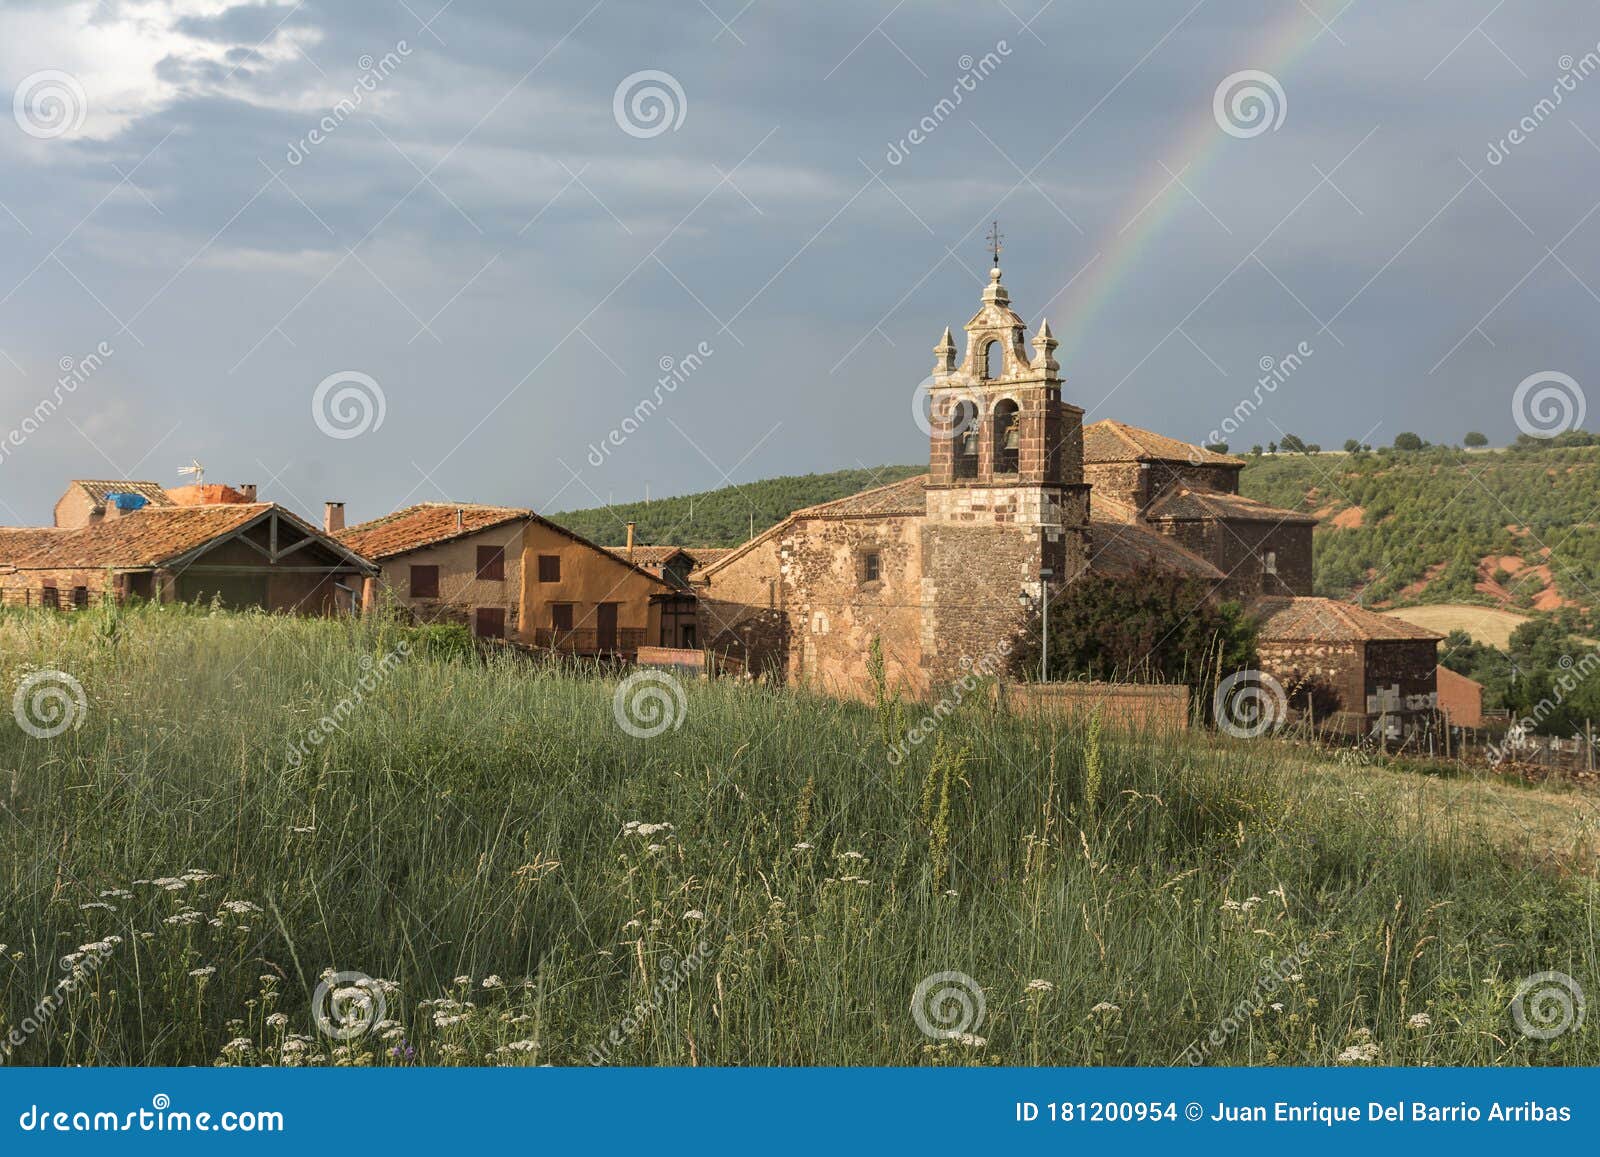 church of san pedro in madriguera, red village of the riaza region province of segovia spain